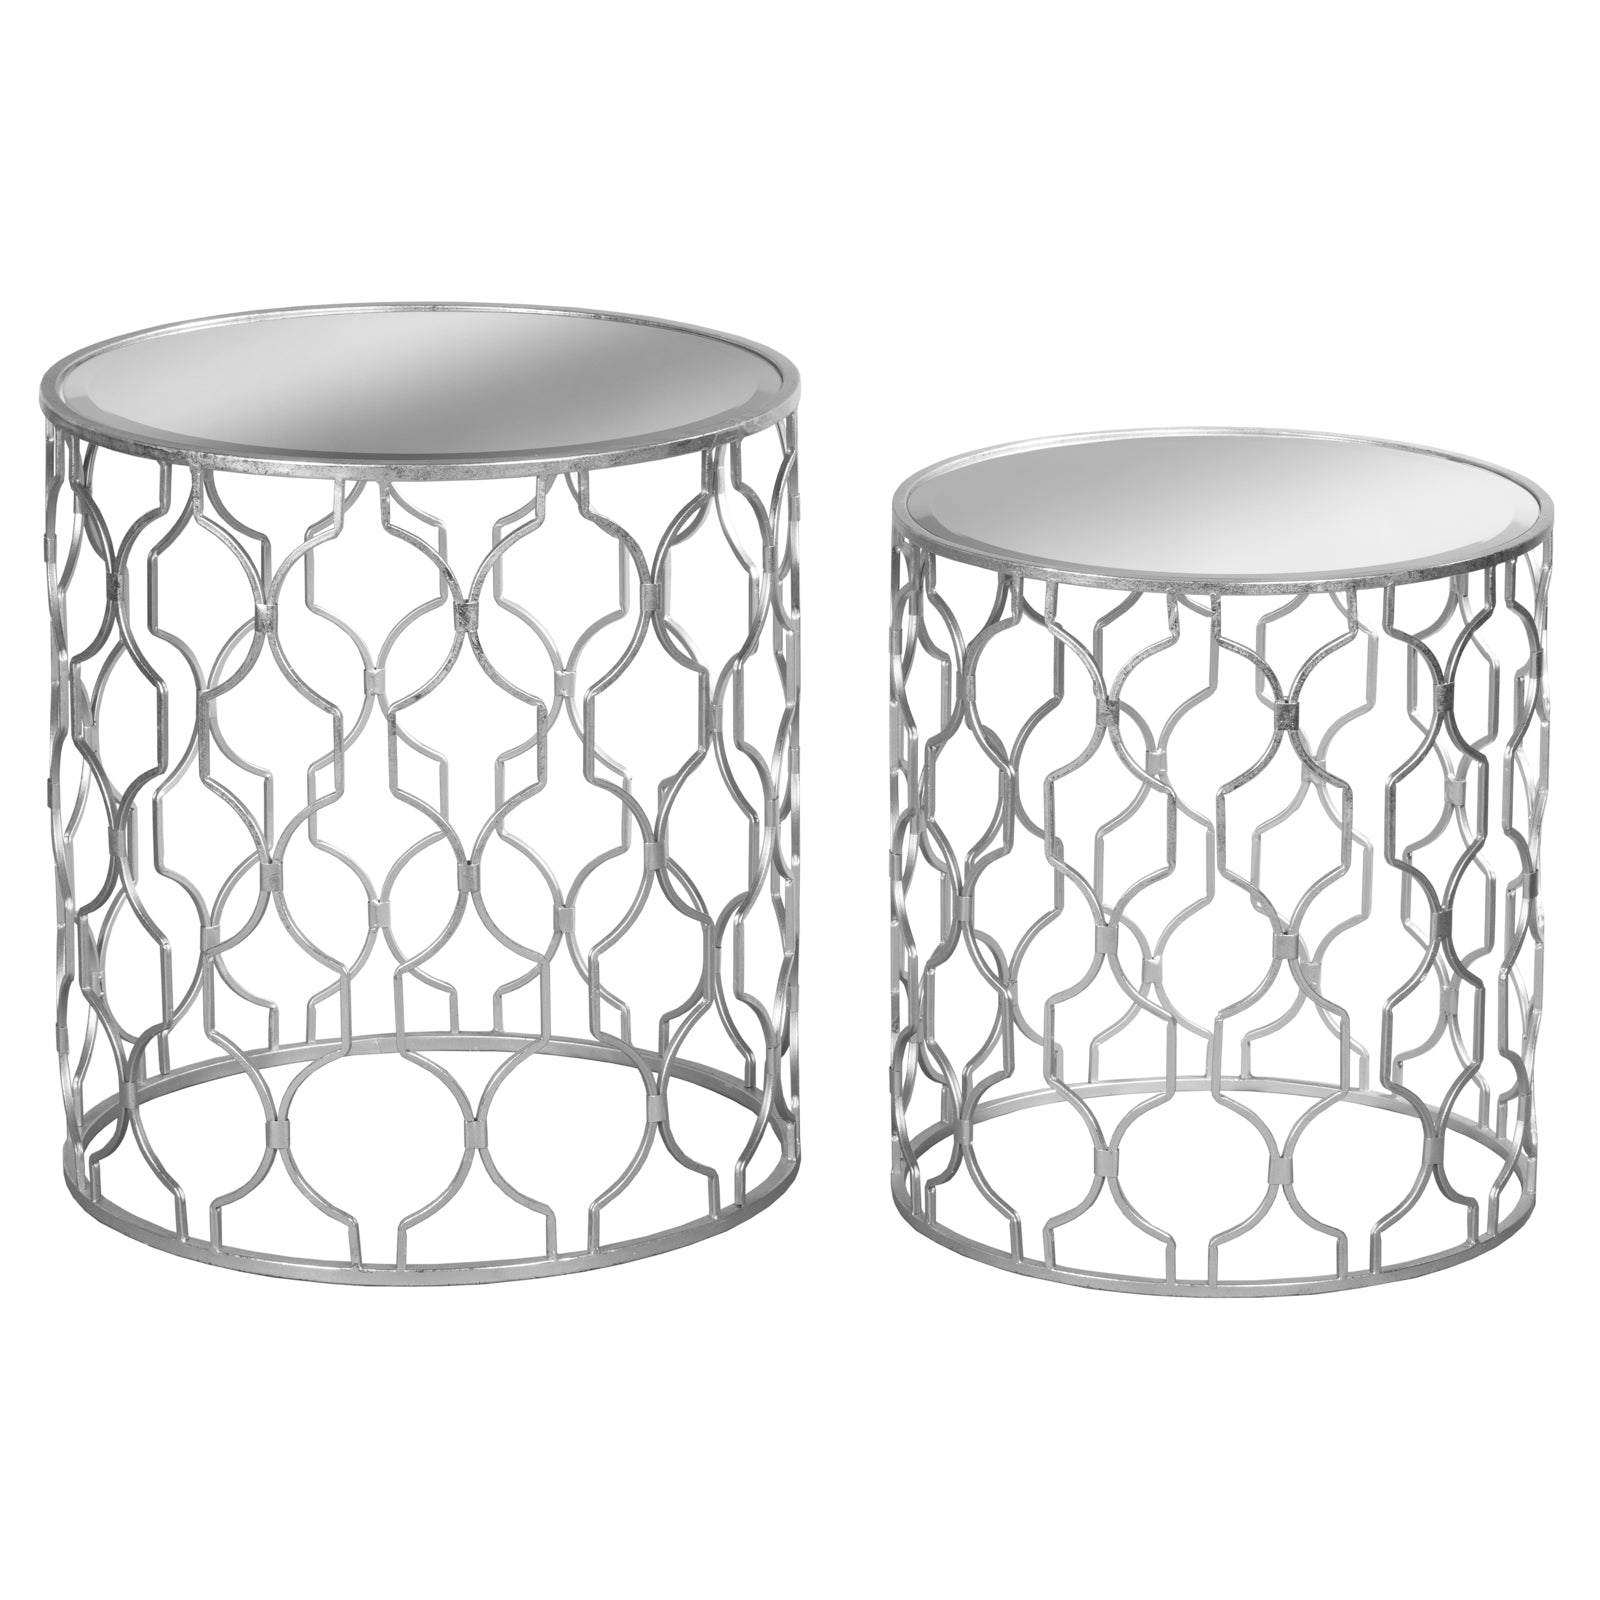 View Set of Two Arabesque Silver Foil Mirrored Side Tables information